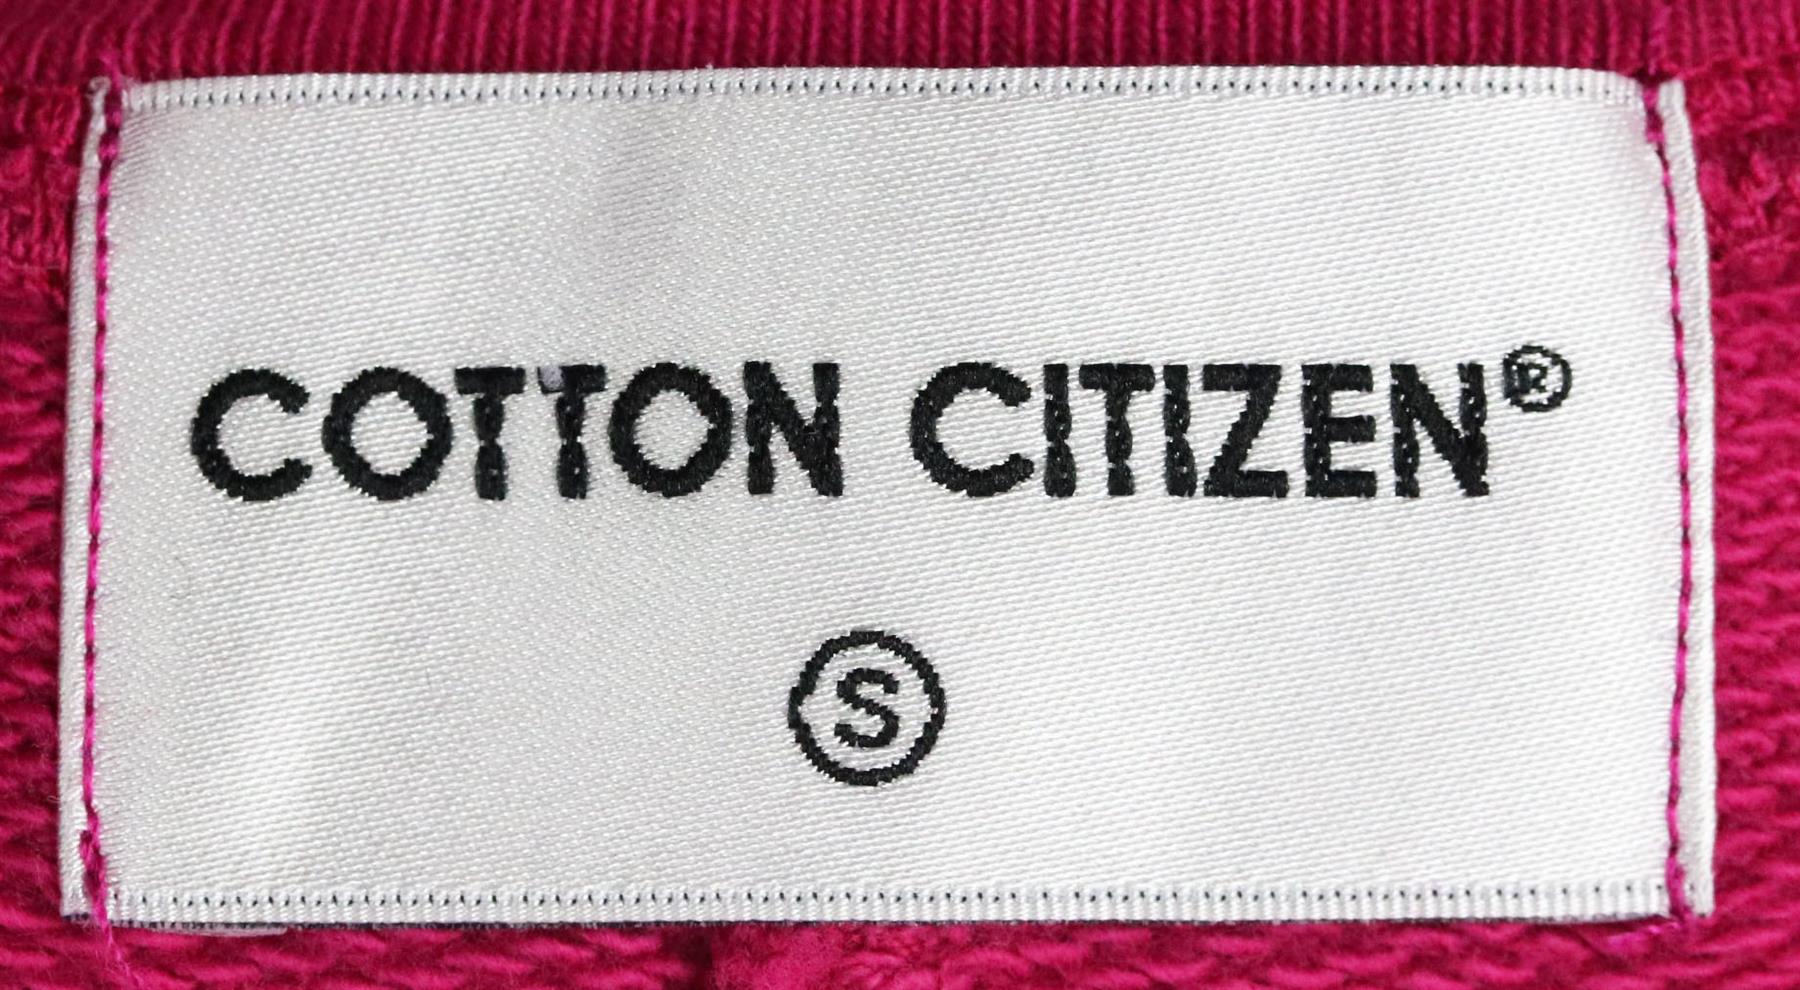 COTTON CITIZEN CROPPED DISTRESSED COTTON TERRY SWEATSHIRT SMALL